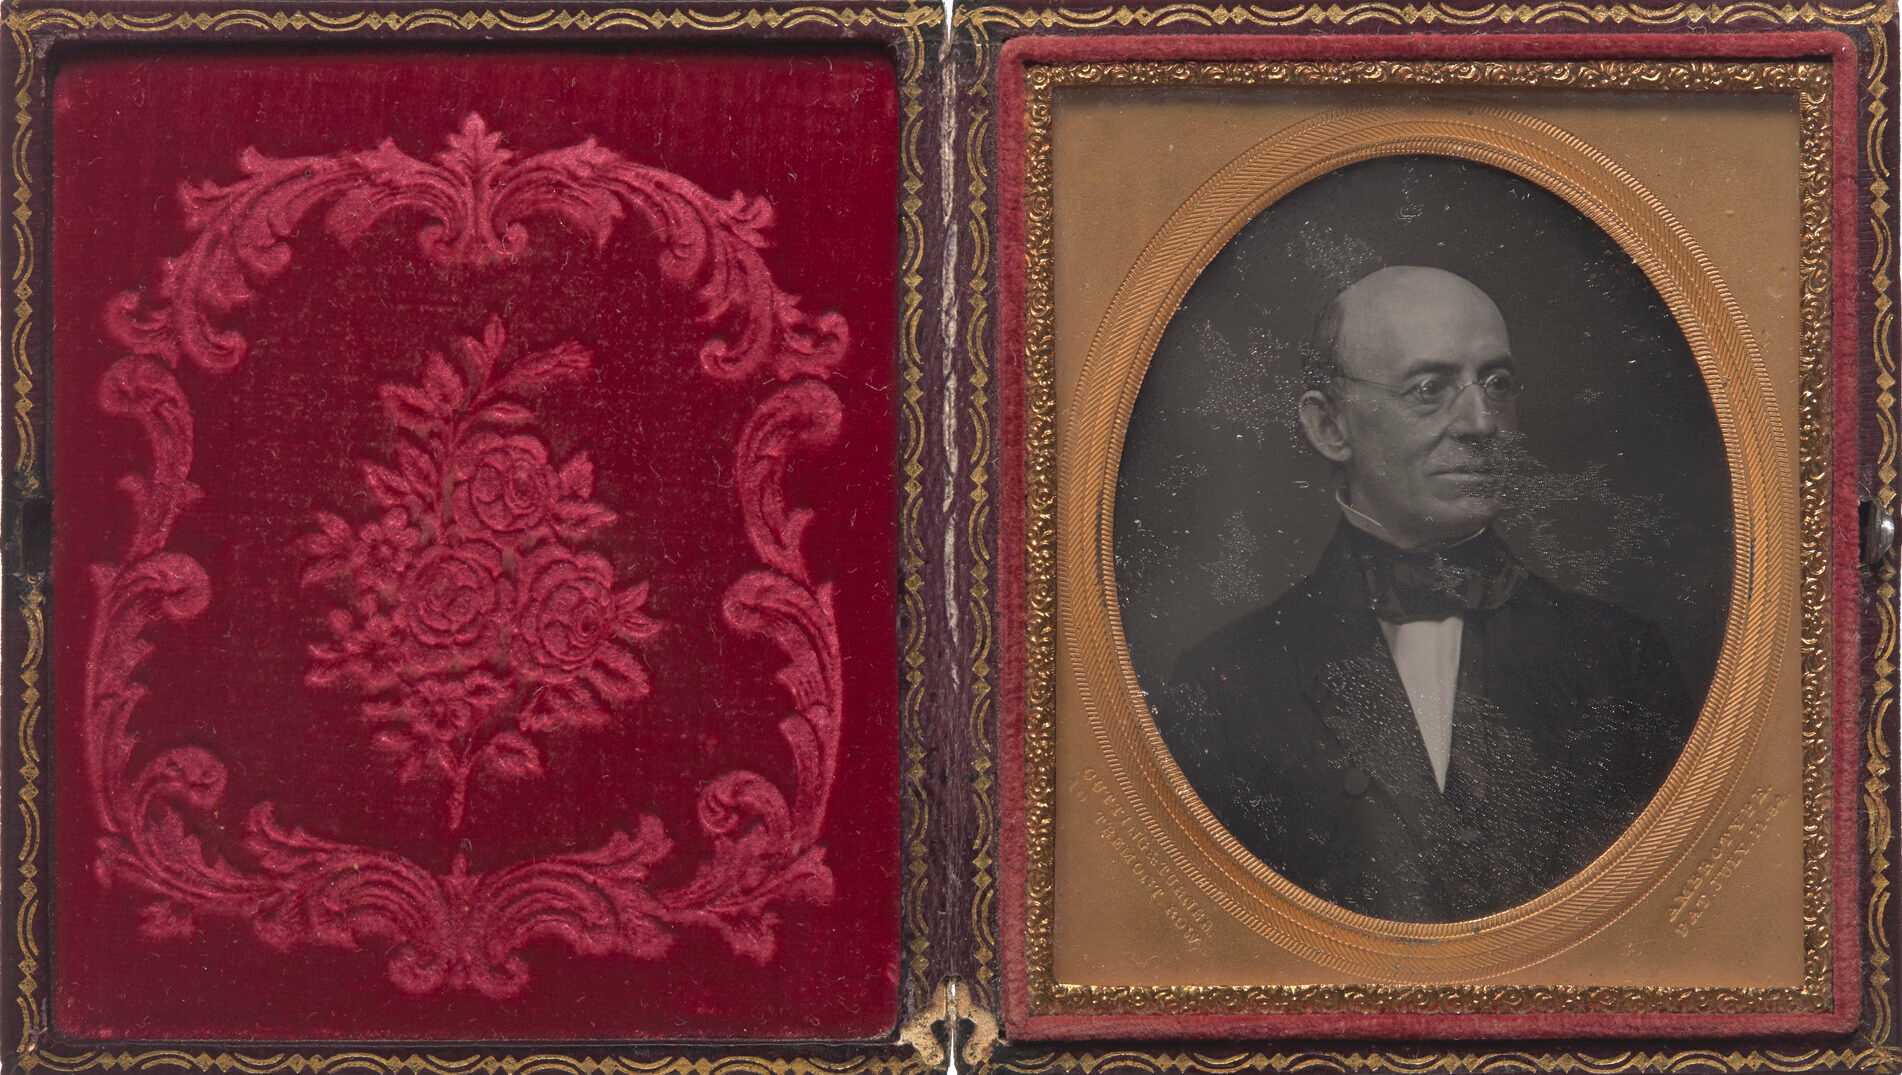 A daguerreotype of William Lloyd Garrison in a case. In the portrait, Garrison is wearing a suit and glasses and looking off to the left. The exterior of the case is black with gold trim. The interior has embossed red velvet on the left side and the photograph inside a gold oval frame on the right. The glass over the image is heavily scratched. Stamped into the bottom left corner of the frame: "CUTTING & TURNER / 10 TREMONT ROW". And in the bottom right corner: "AMBROTYPE. / PAT. JULY. 11-54"